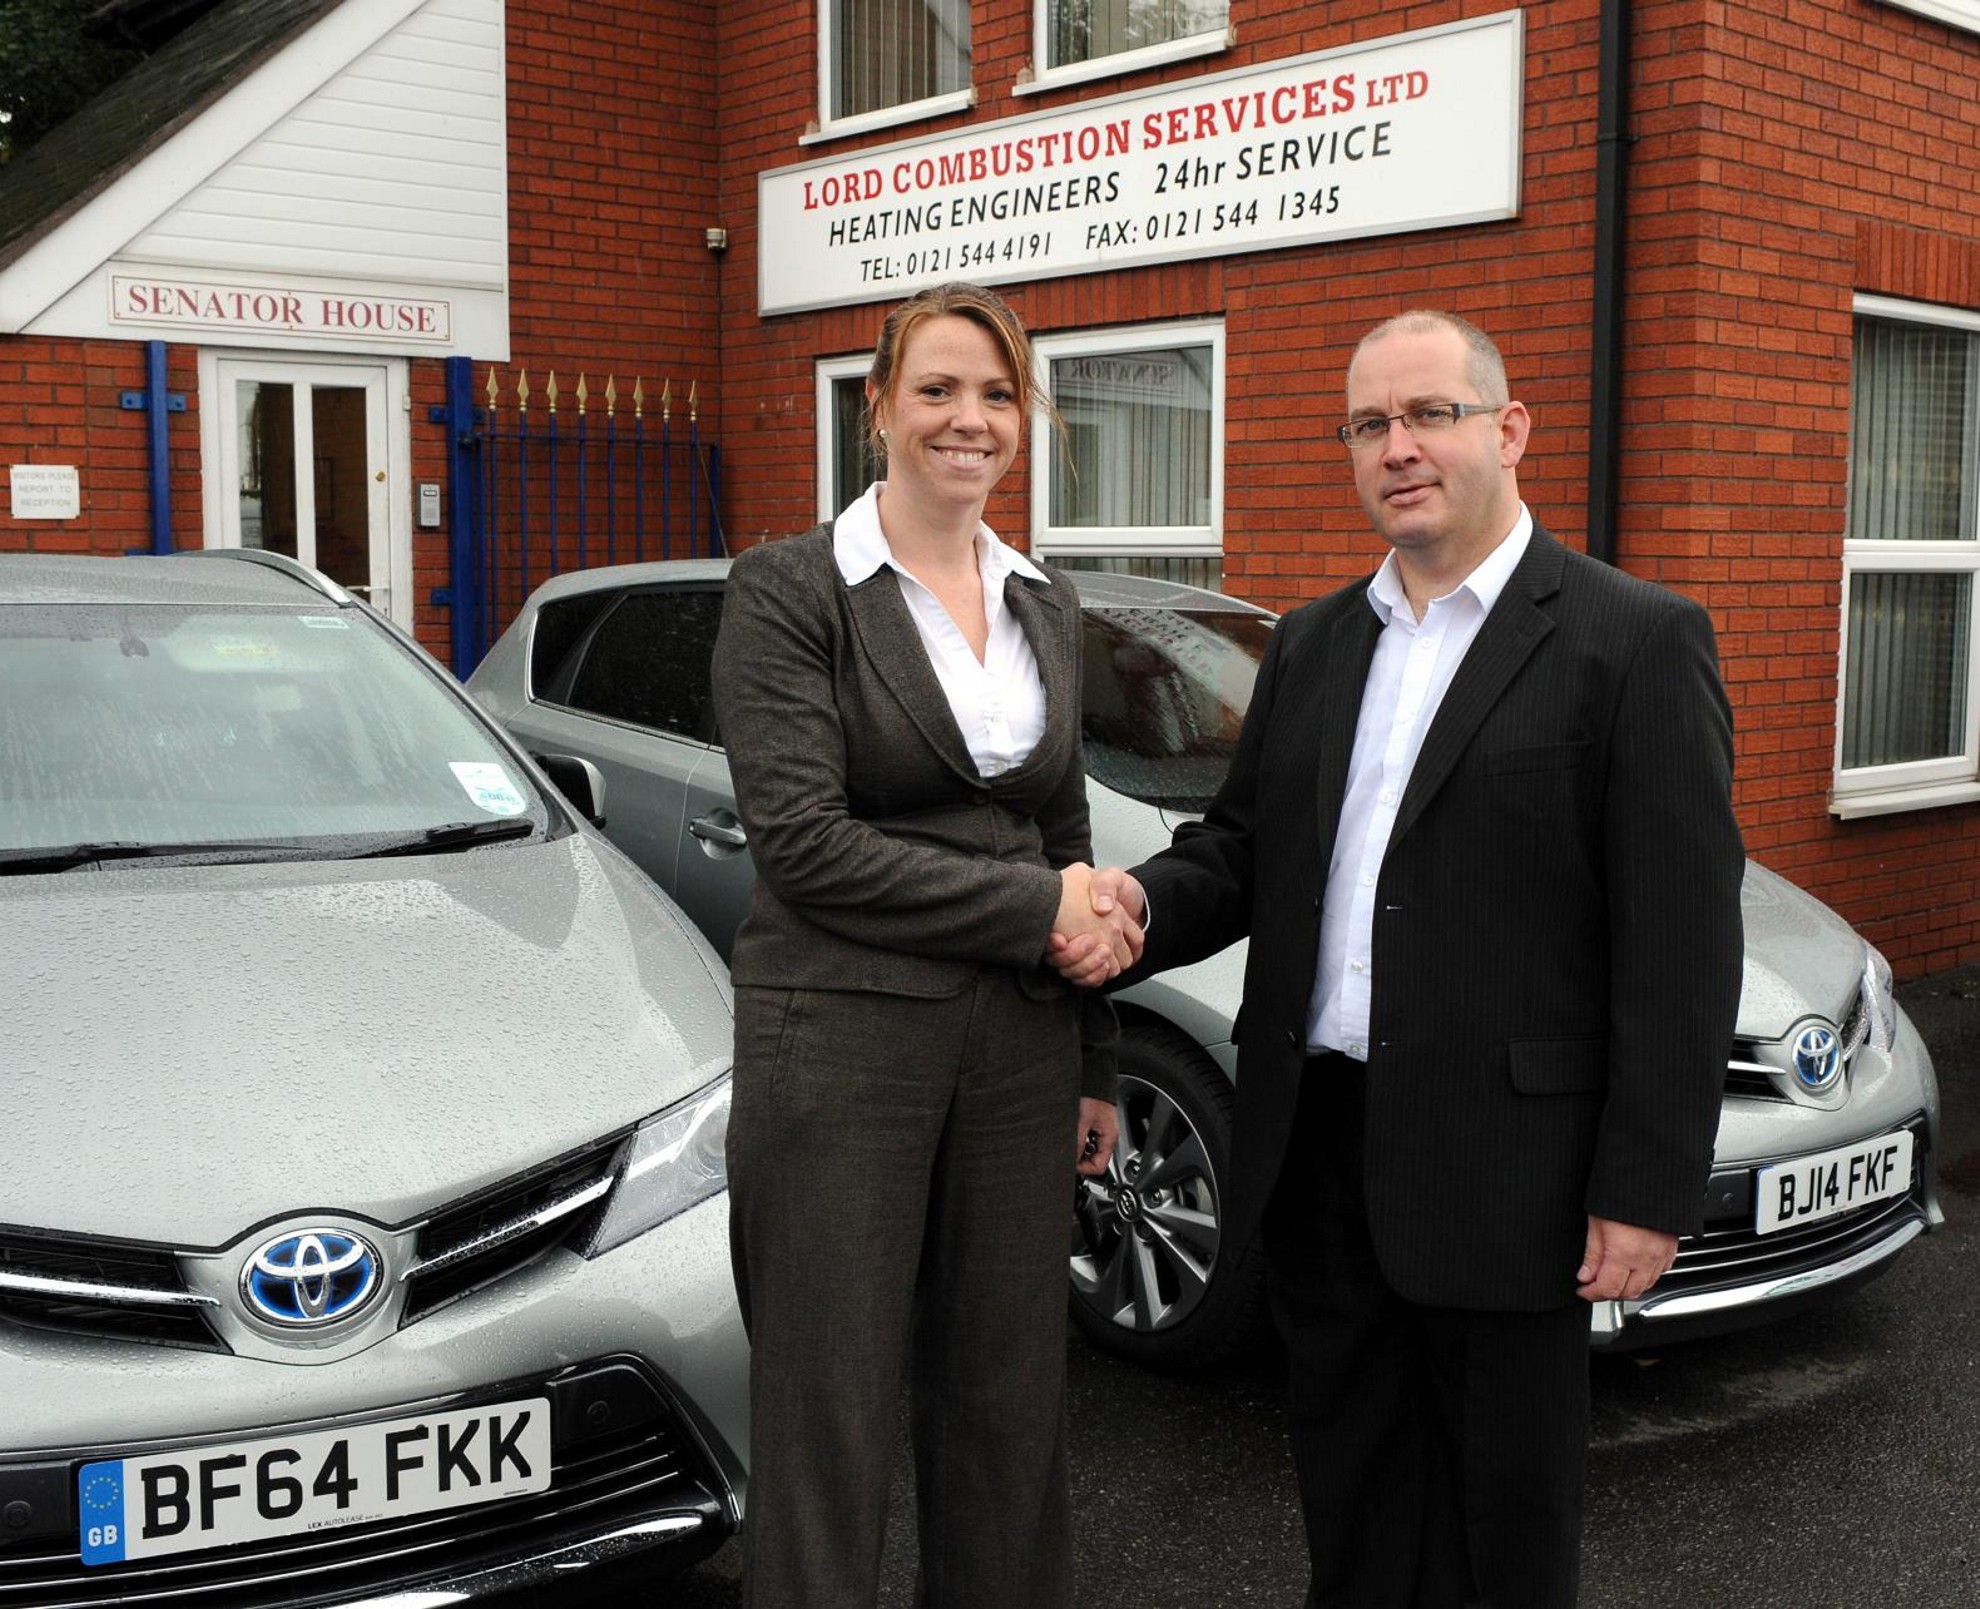 LORD COMBUSTION FIRES UP A NEW FLEET OF TOYOTA HYBRIDS